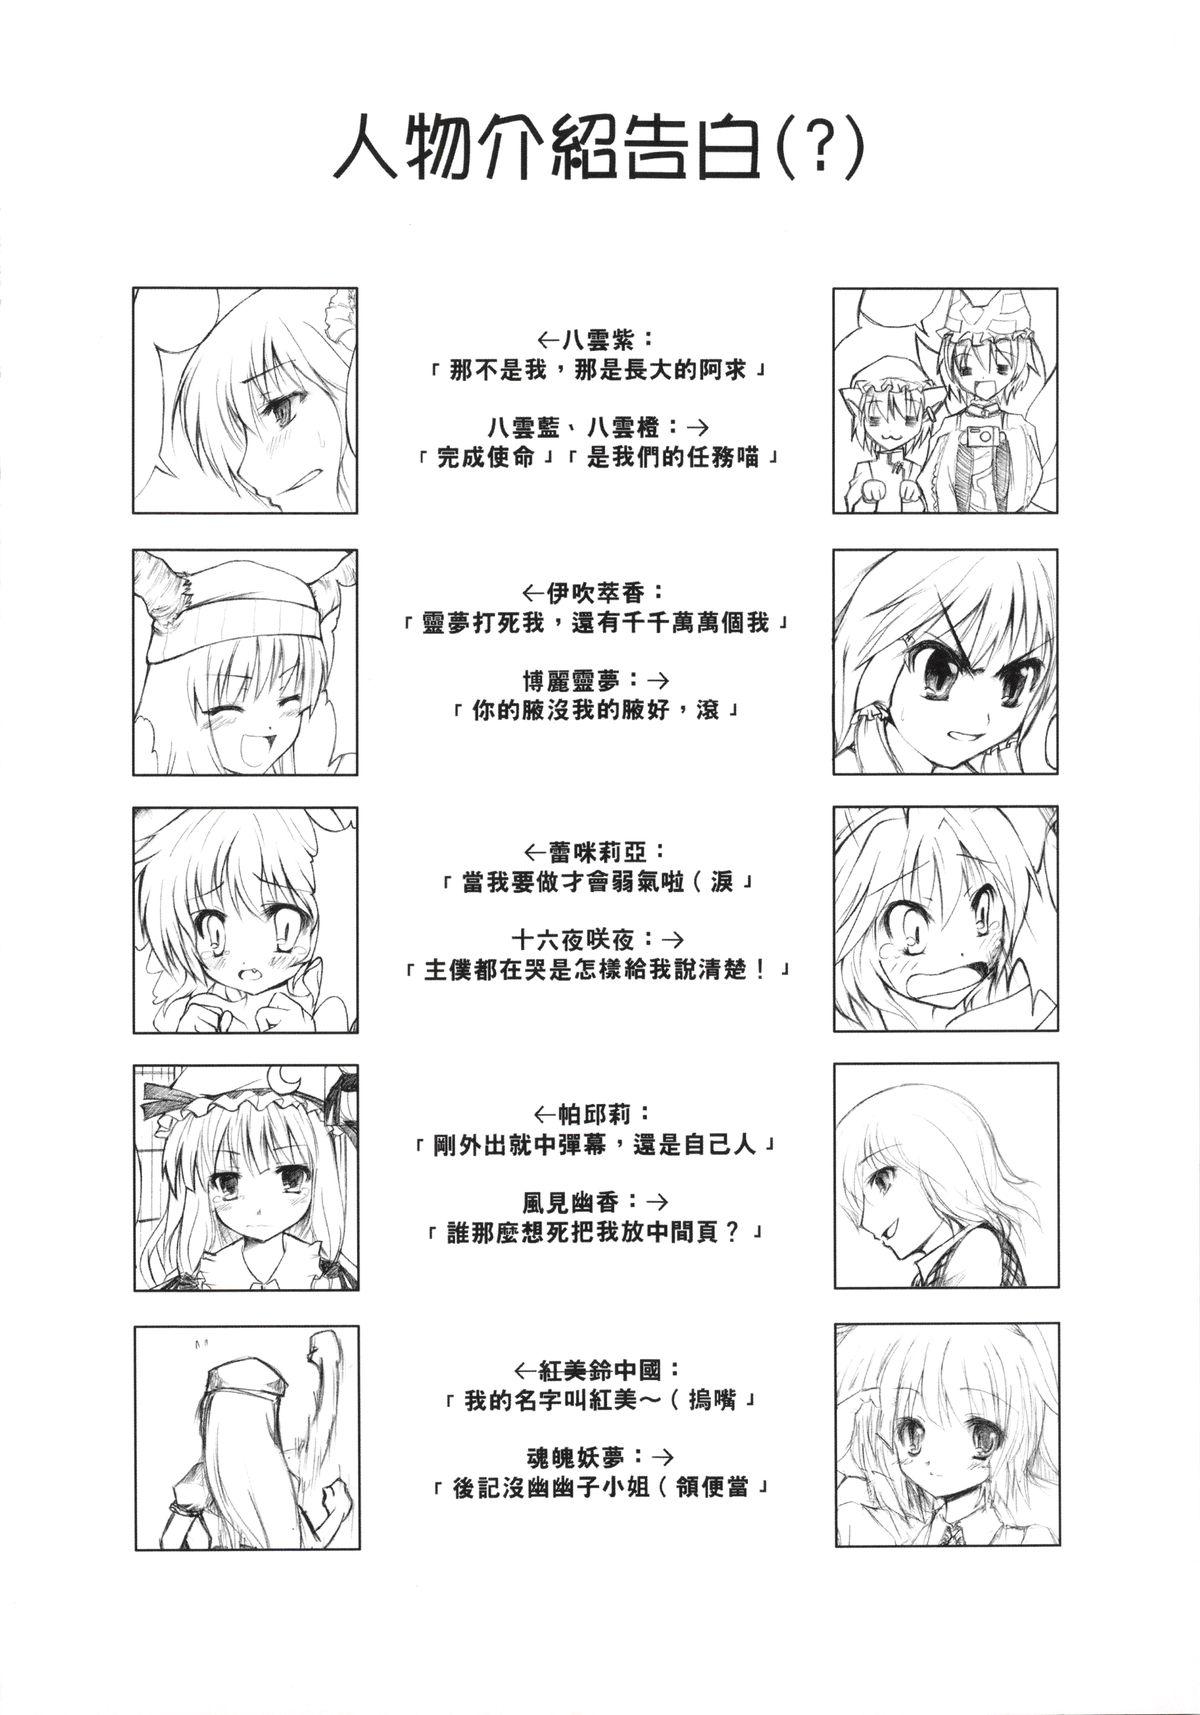 Clit 紫隙間Die! - Touhou project People Having Sex - Page 4